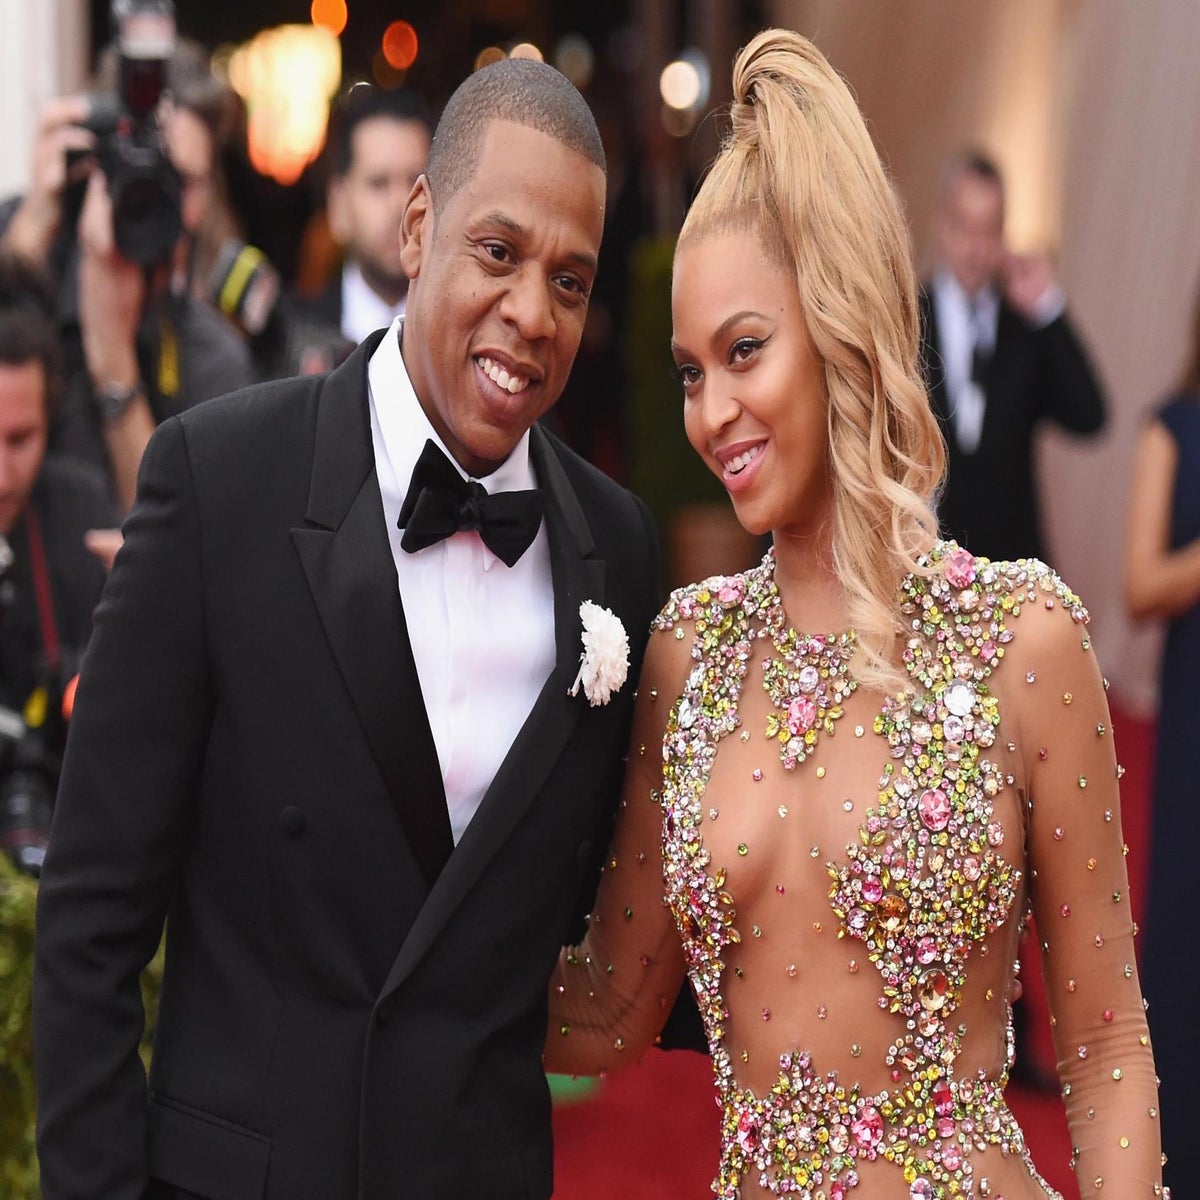 Jay-Z snatches phone from party guest after he attempts to film Beyoncé | The Independent | The Independent